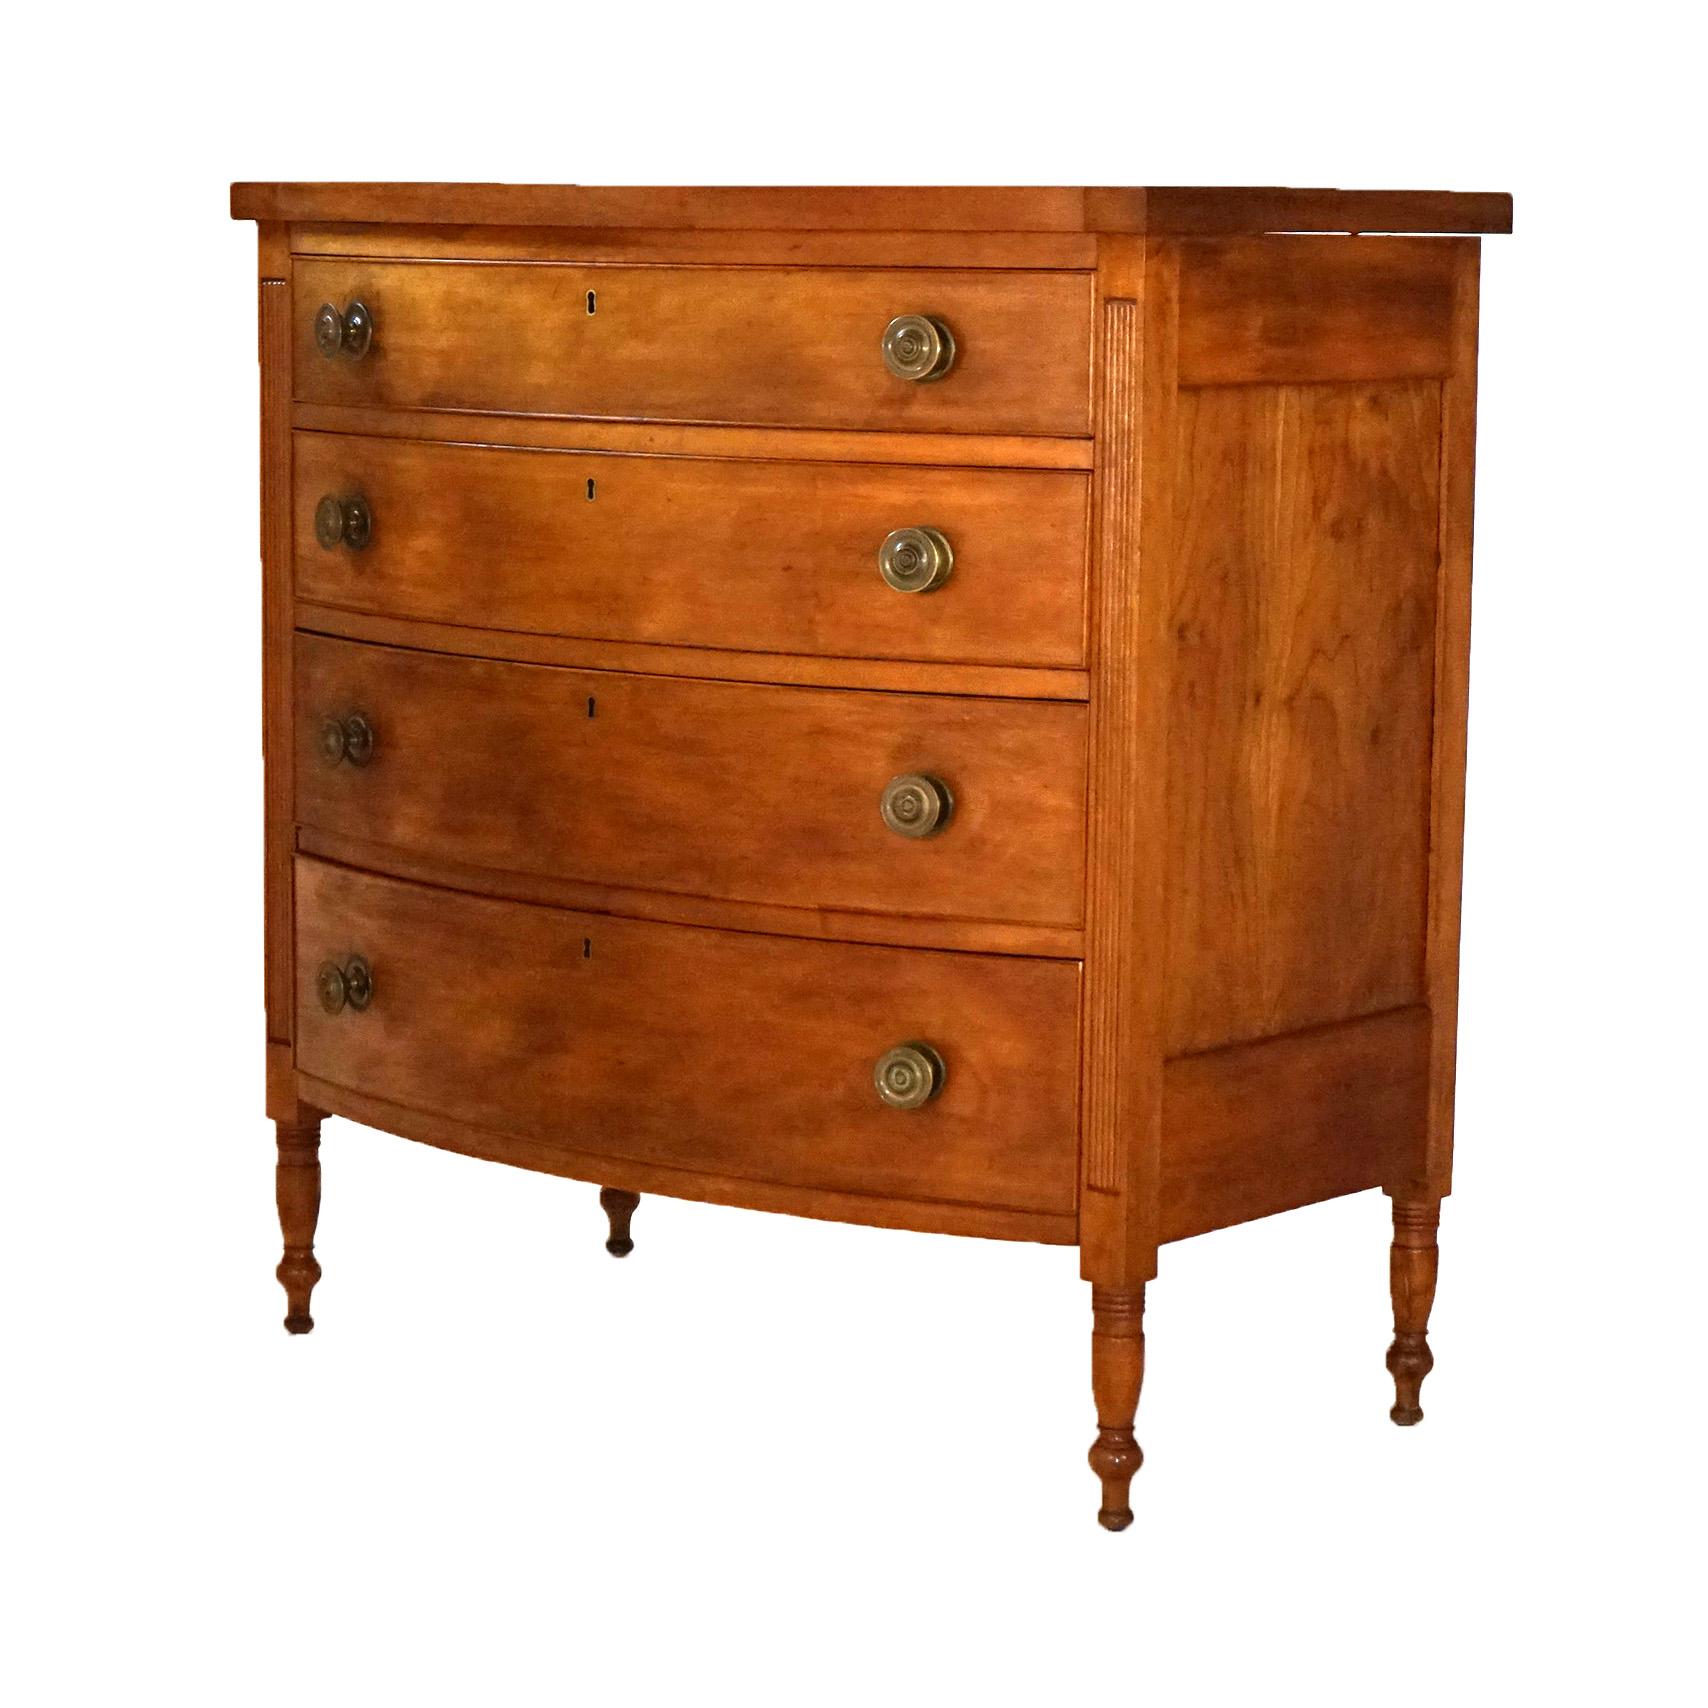 ***Ask About Reduced In-House Shipping Rates - Reliable Service & Fully Insured***
Antique Sheraton Cherry Swell Front Chest with Four Graduated Drawers and Turned Legs, Circa 1830

Measures - 42